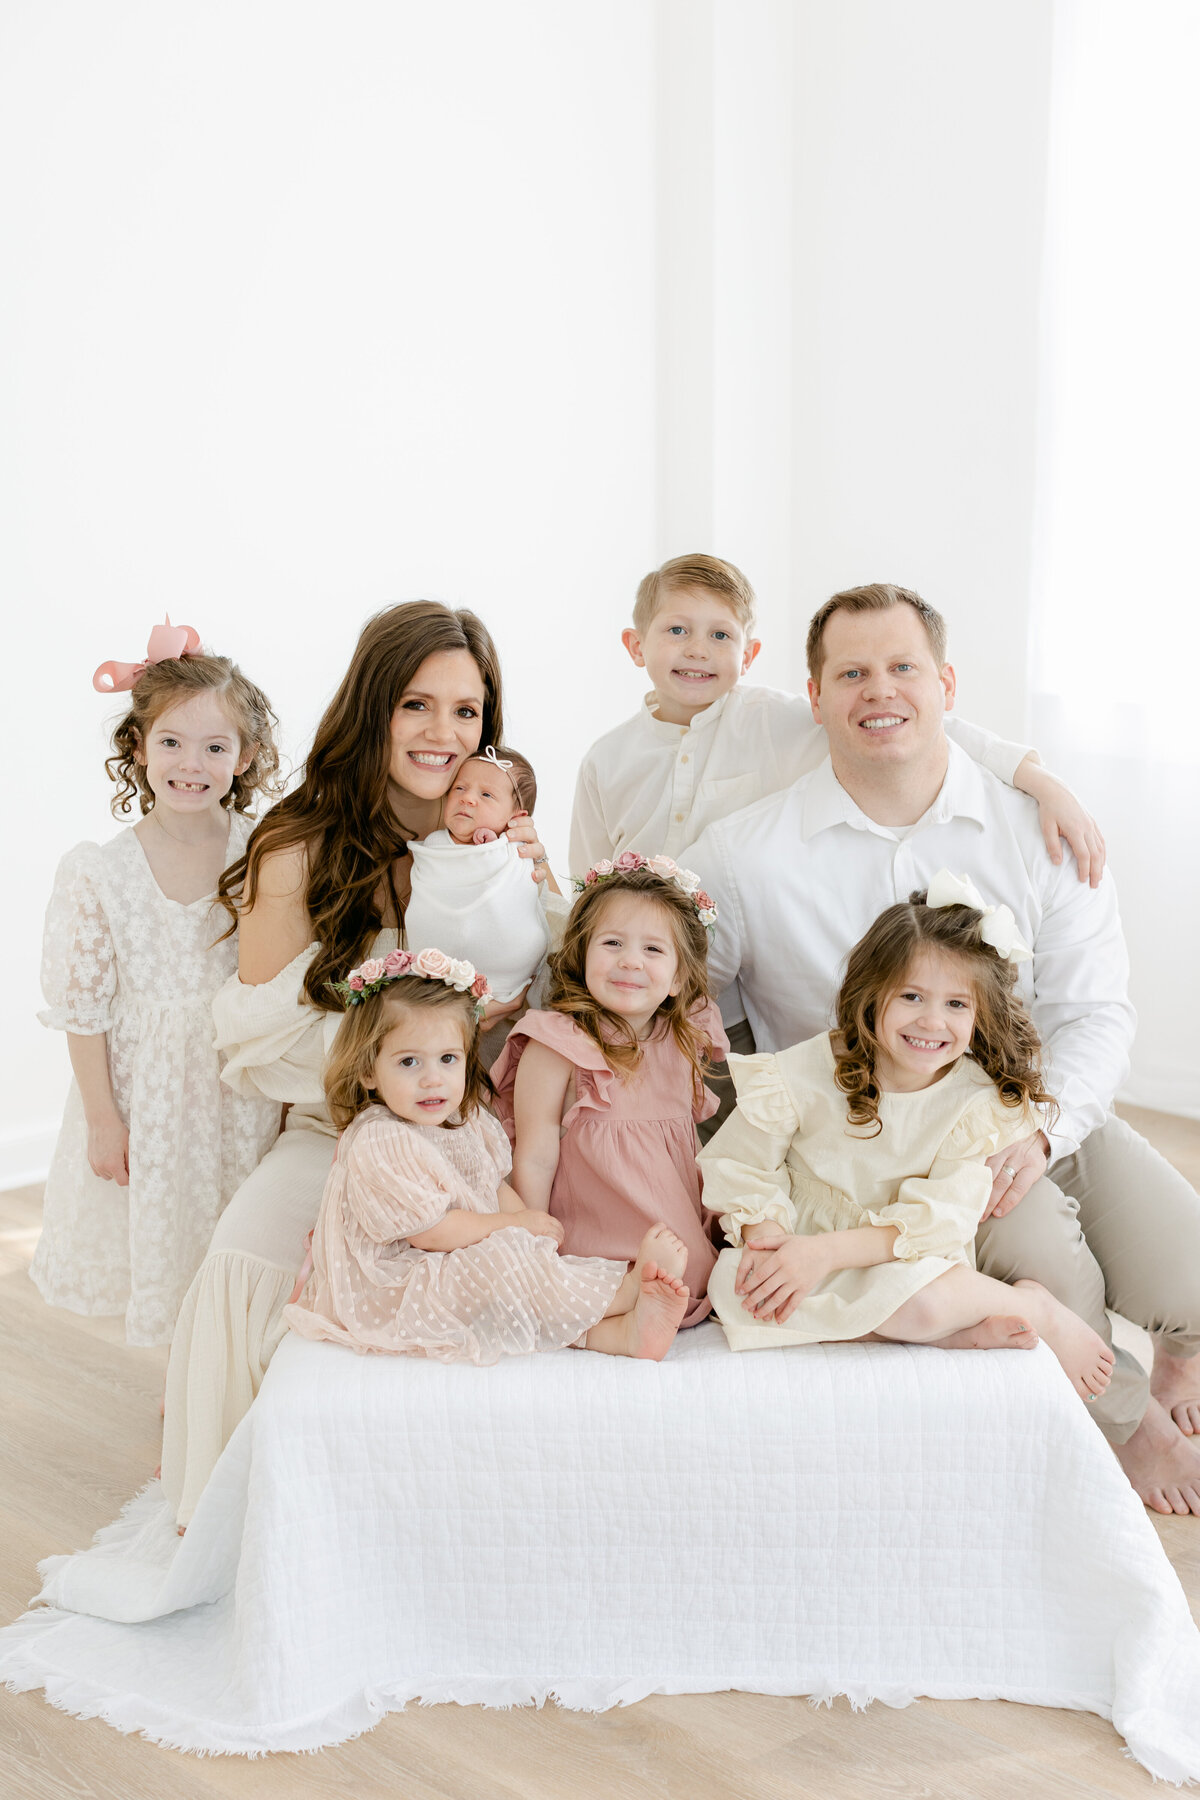 Family of 8 gathered on a bed in Family Photographer South Jersey tara Federico's Haddonfield Studio